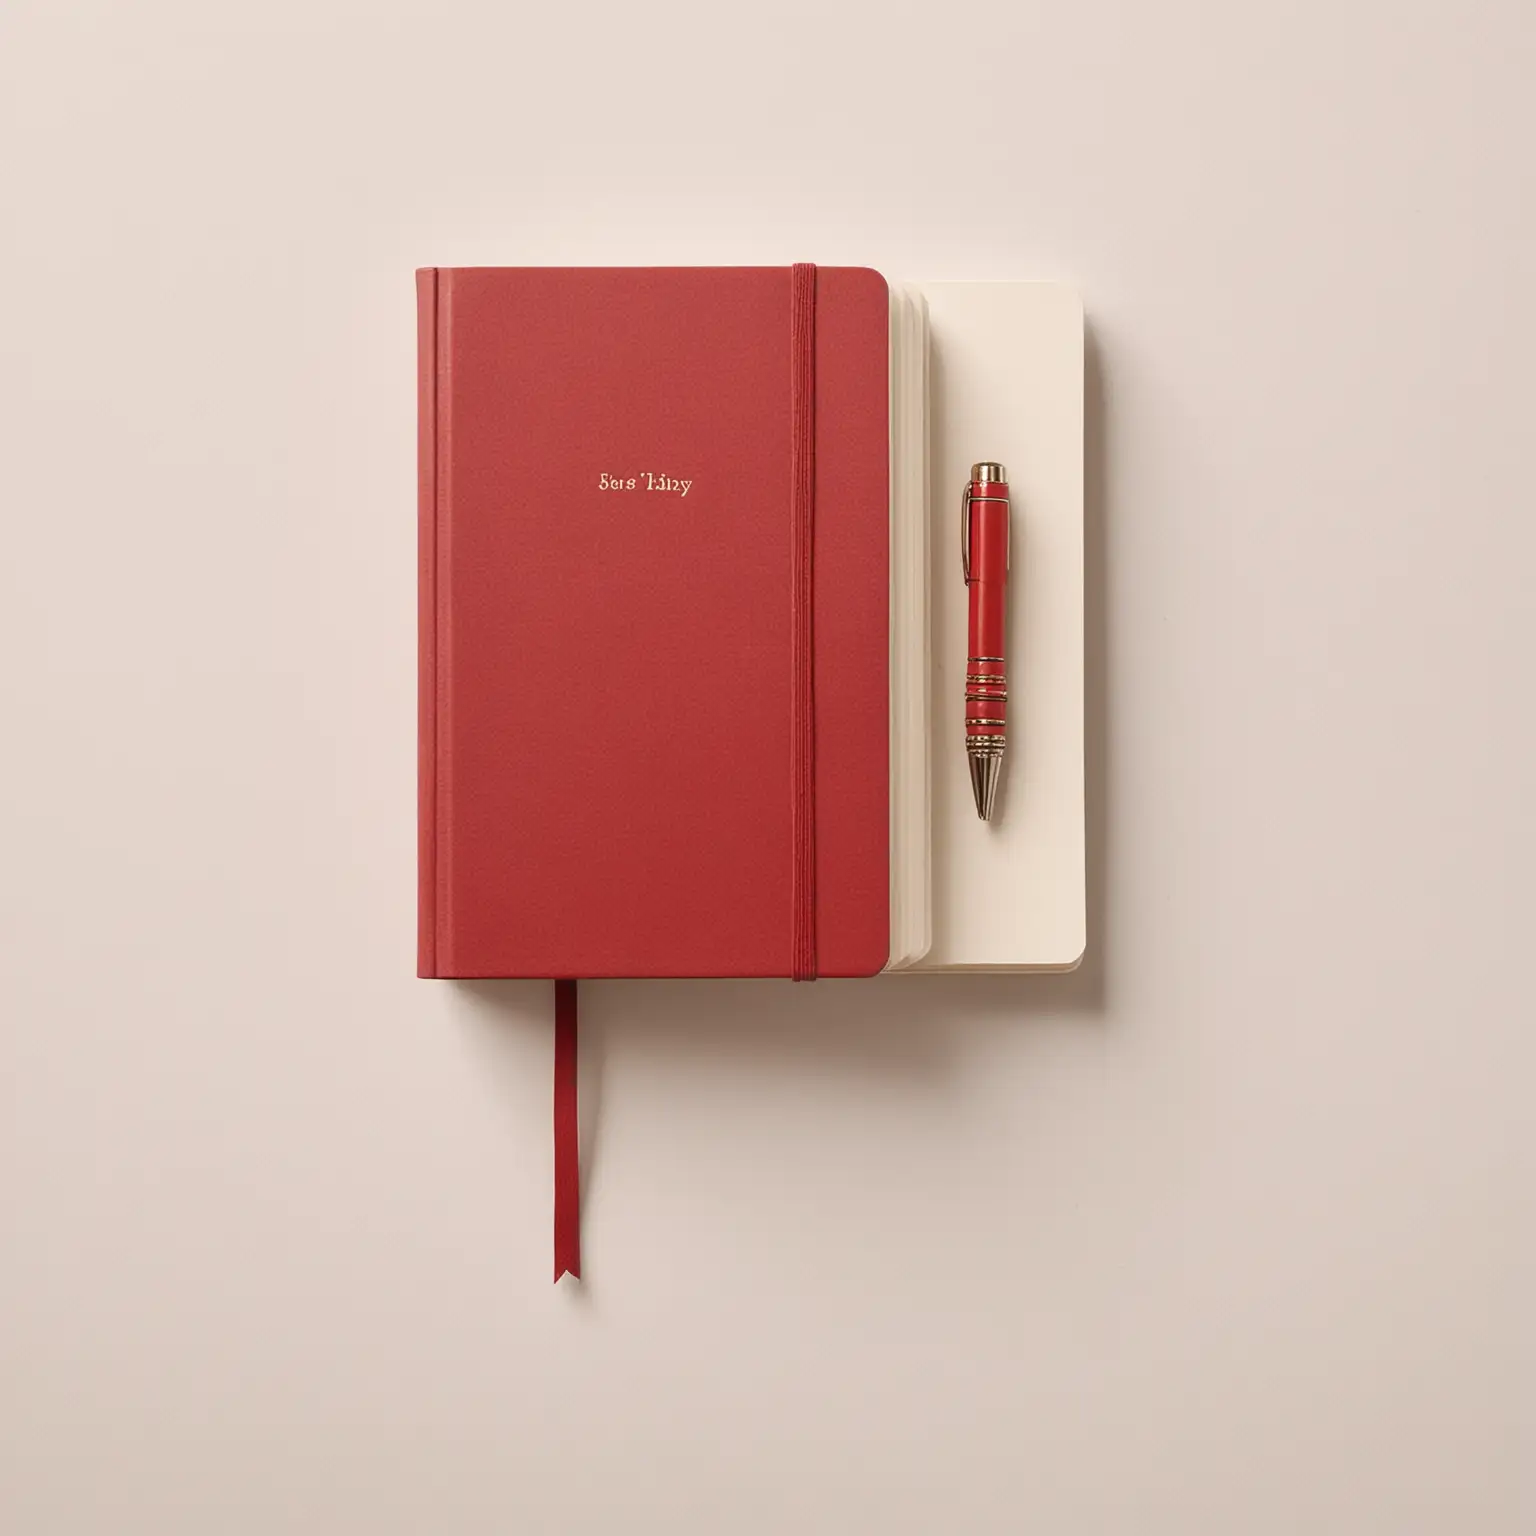 Red Diary on White Background